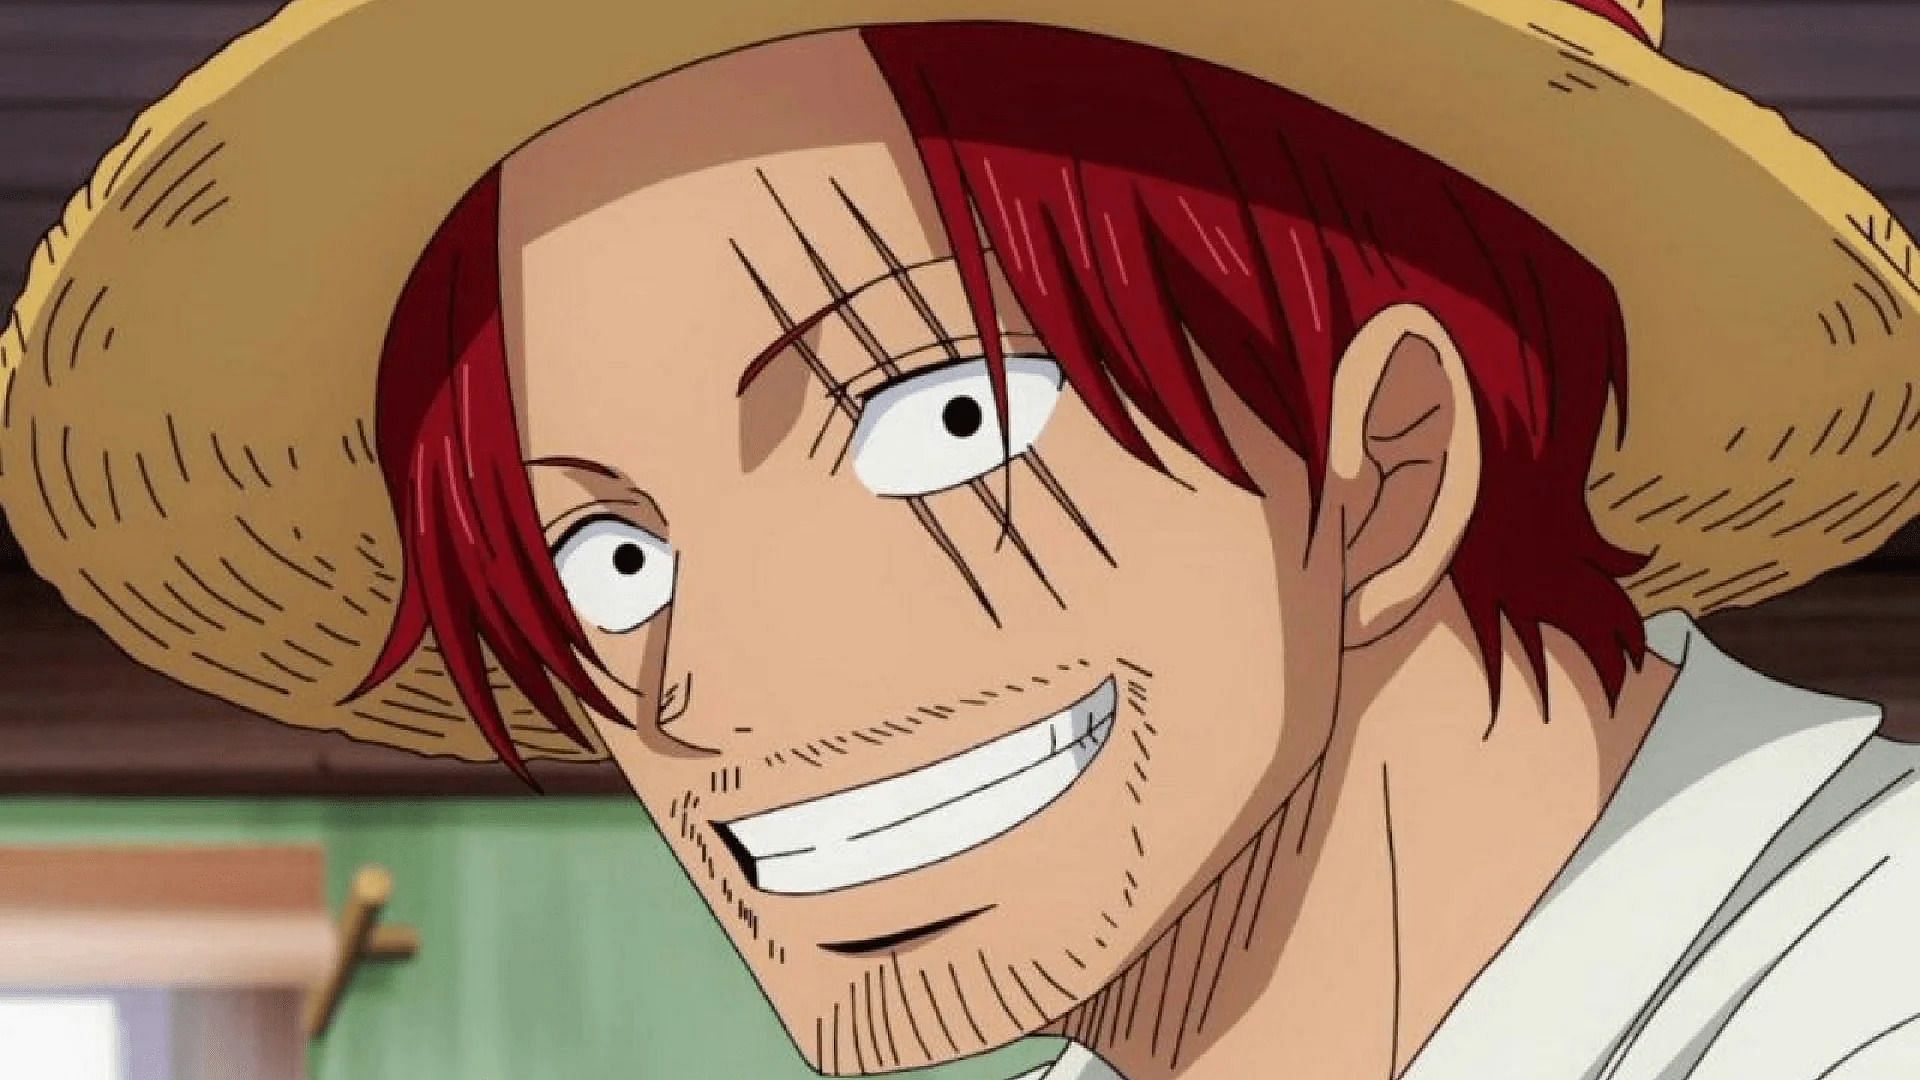 Shanks as seen in the series (Image via Toei Animation)